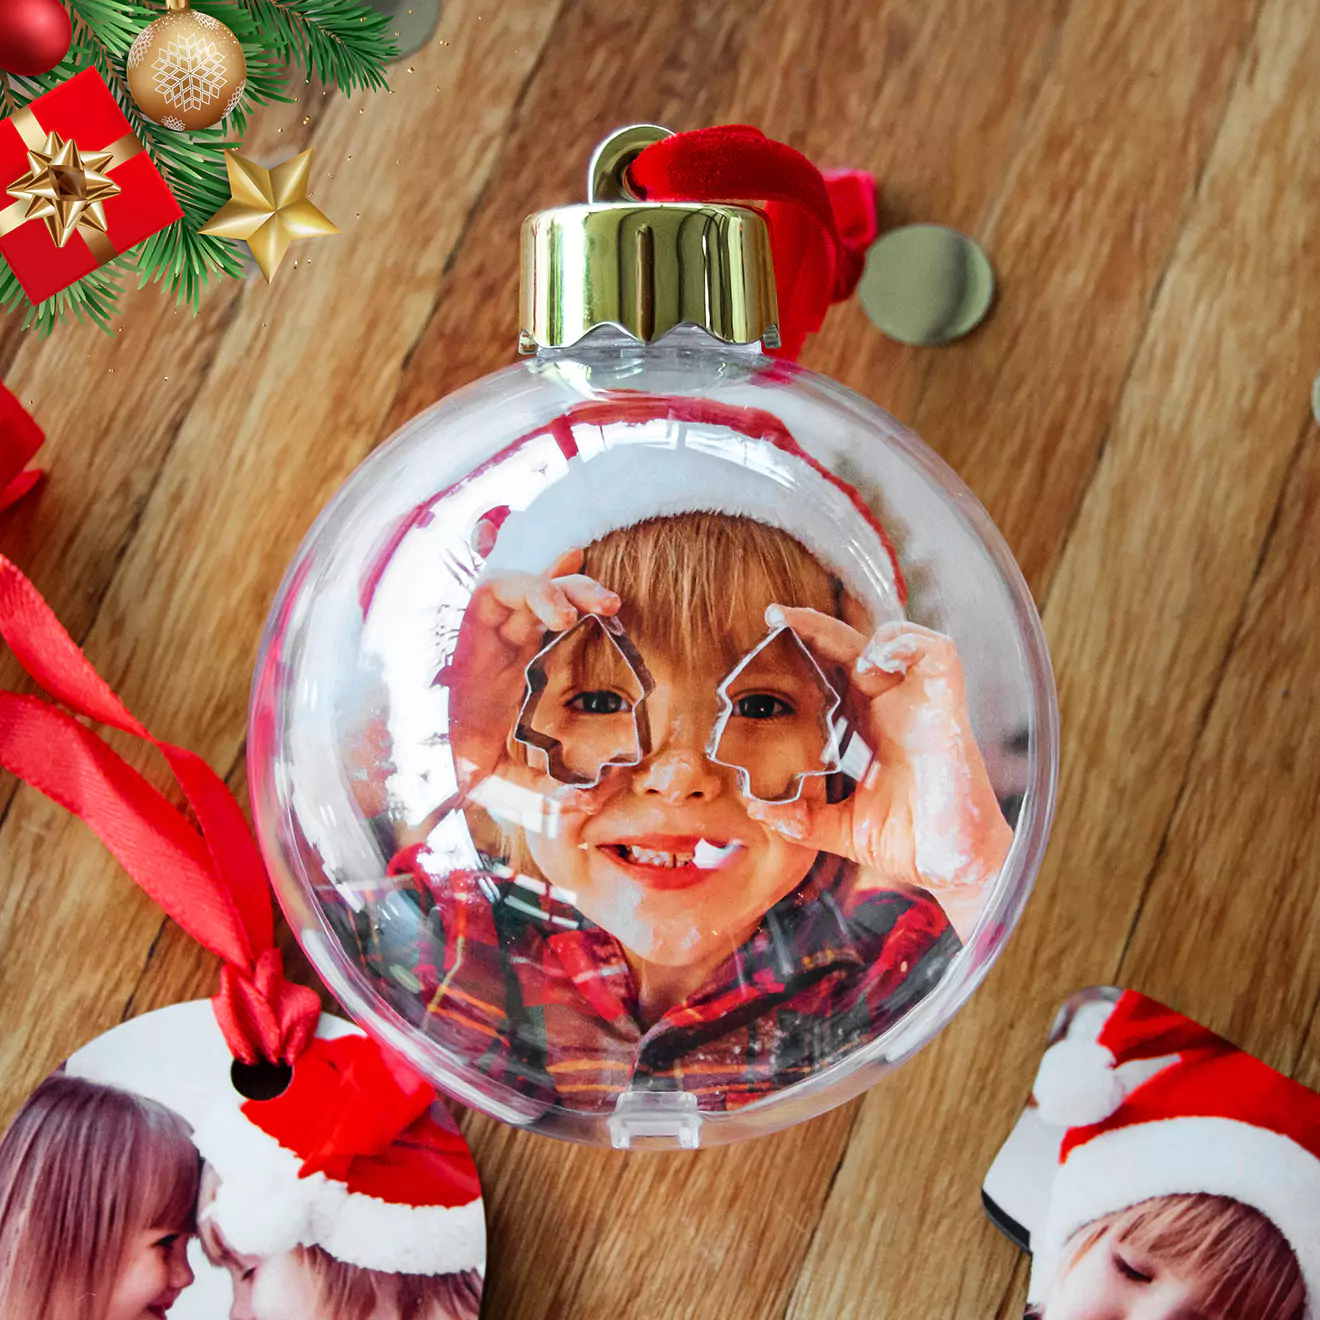 Print your photo on a round Christmas tree bauble online with RapidStudio